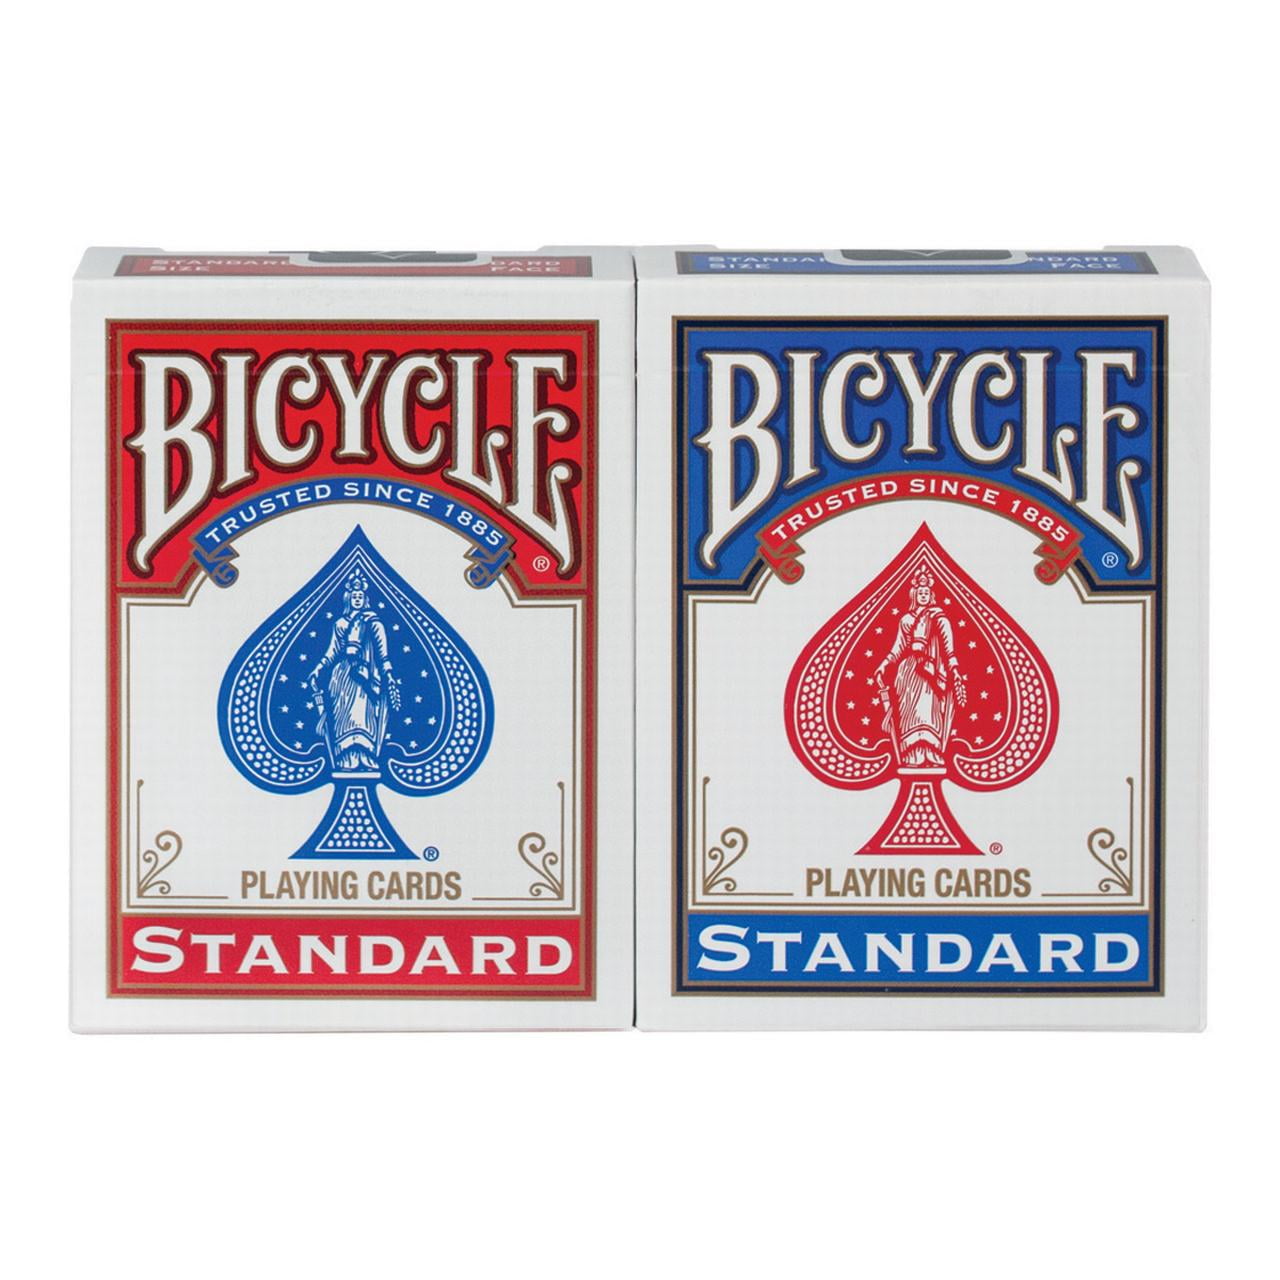 Bicycle Brand Cards For Jack Bycicle Sports " & 2 Deck Playing Card Shuffler 